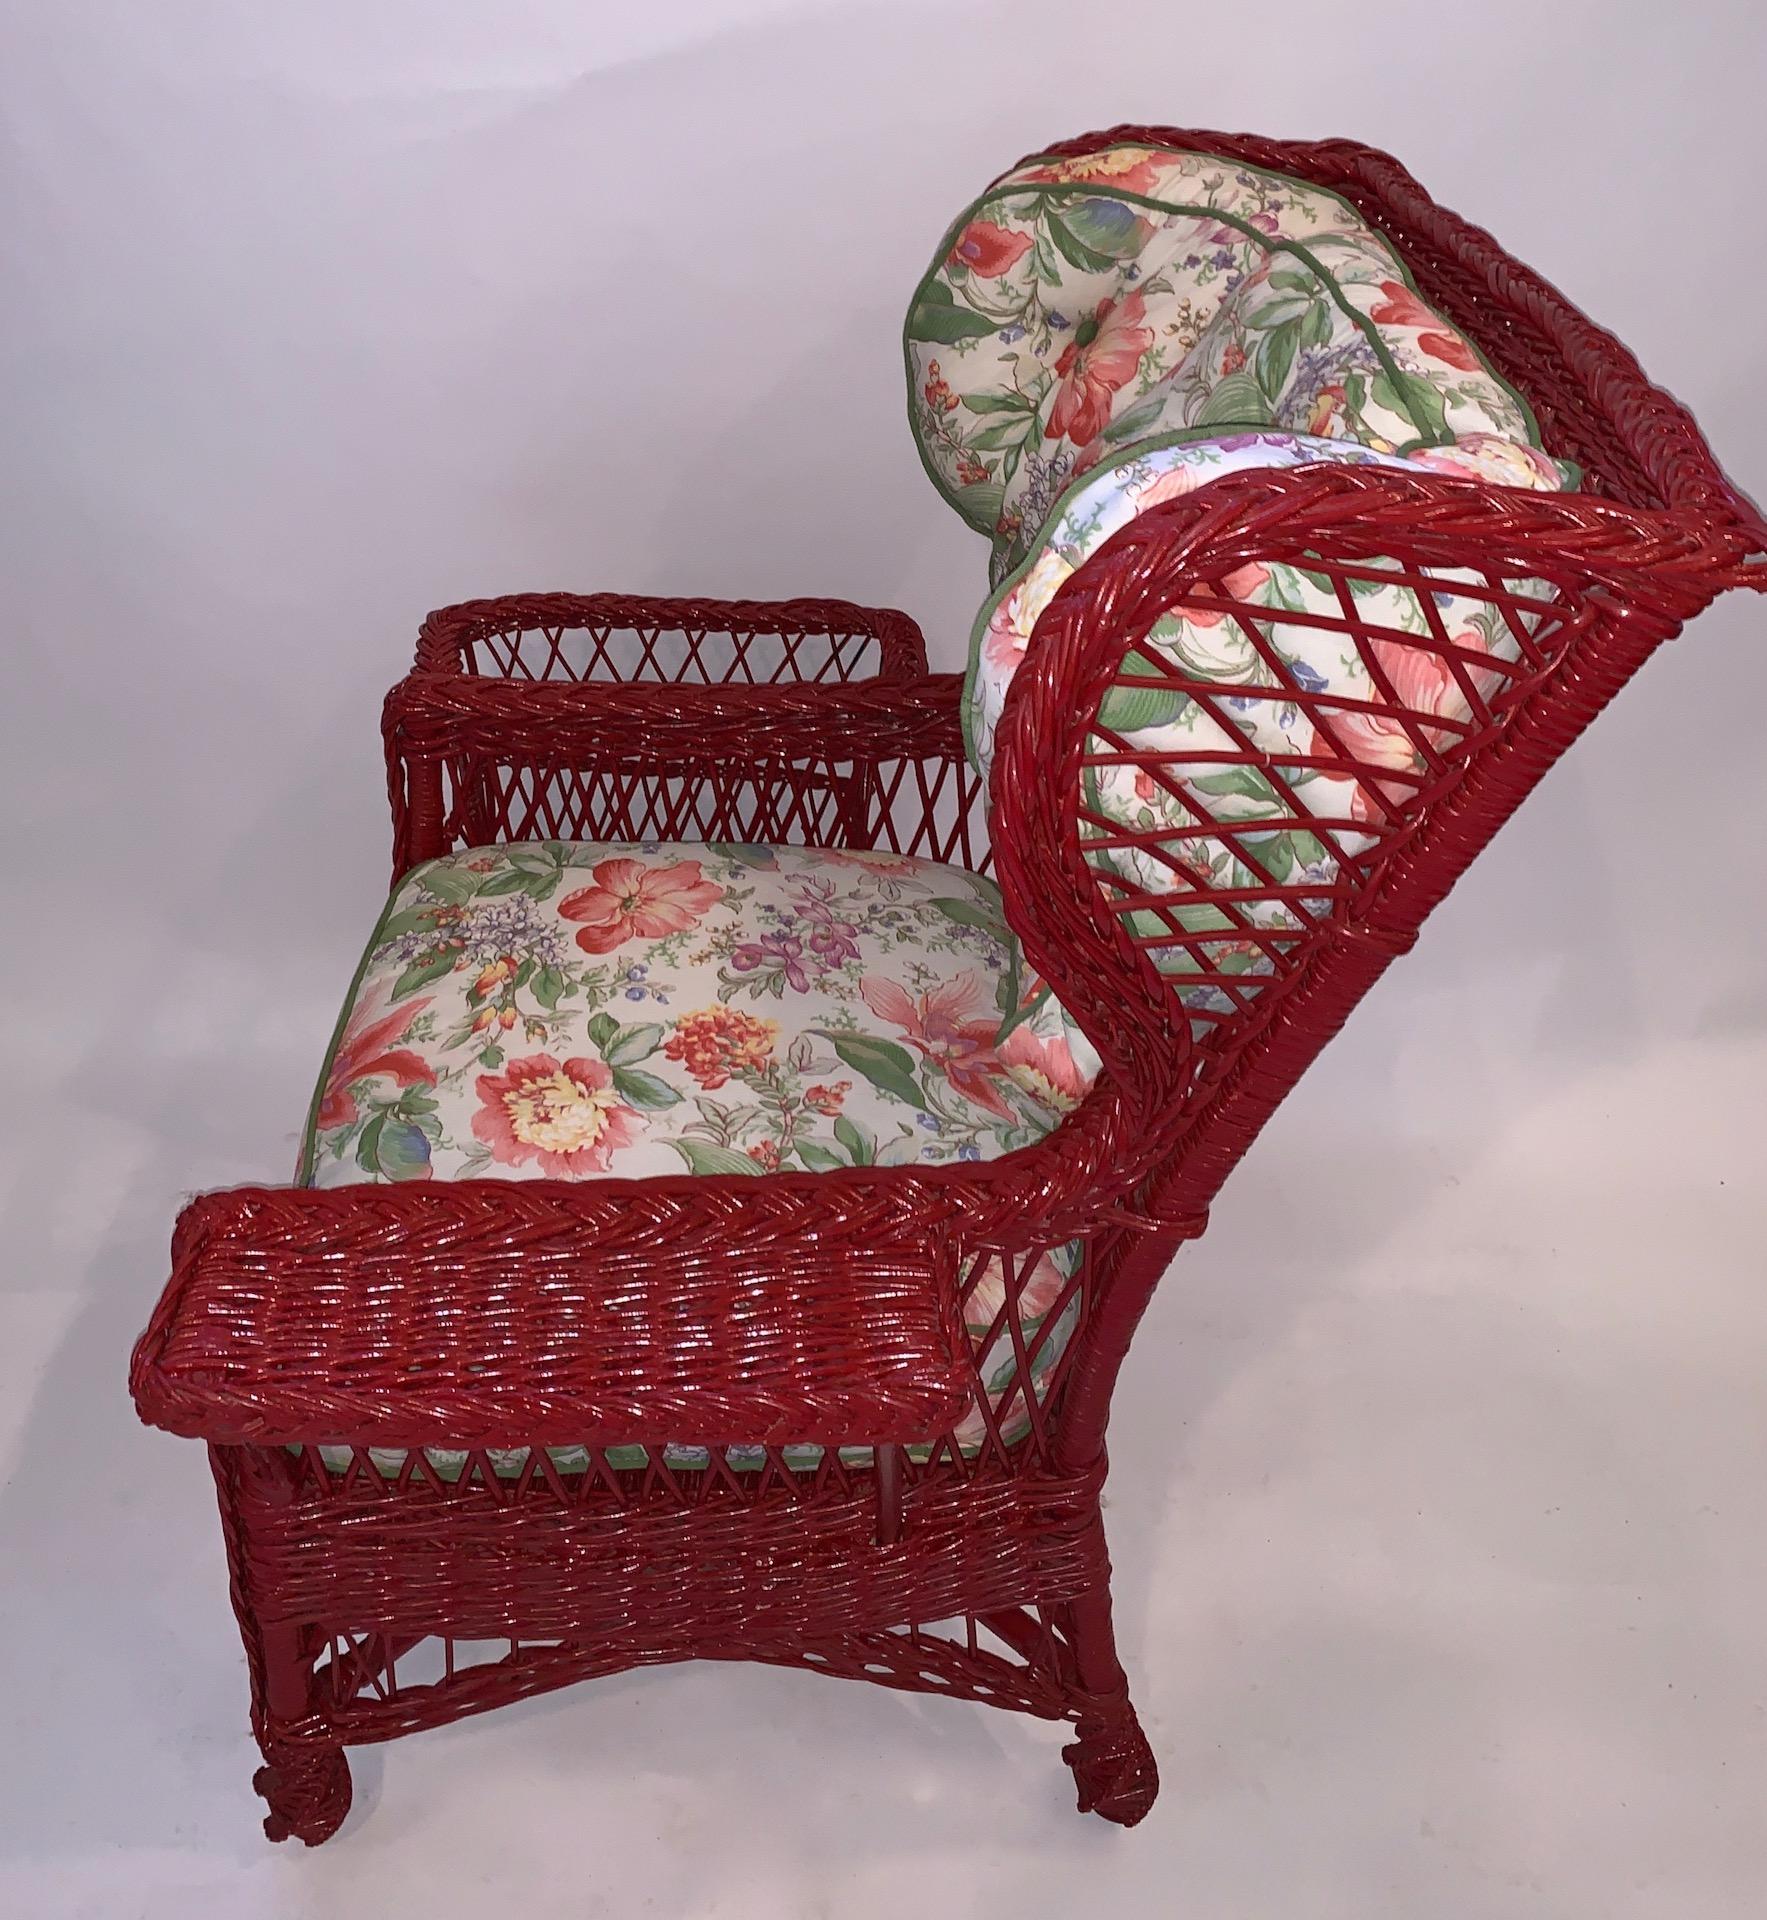 Large Early 20th C. Bar Harbor Wing Back Chair with Magazine Pocket In Good Condition For Sale In Nashua, NH